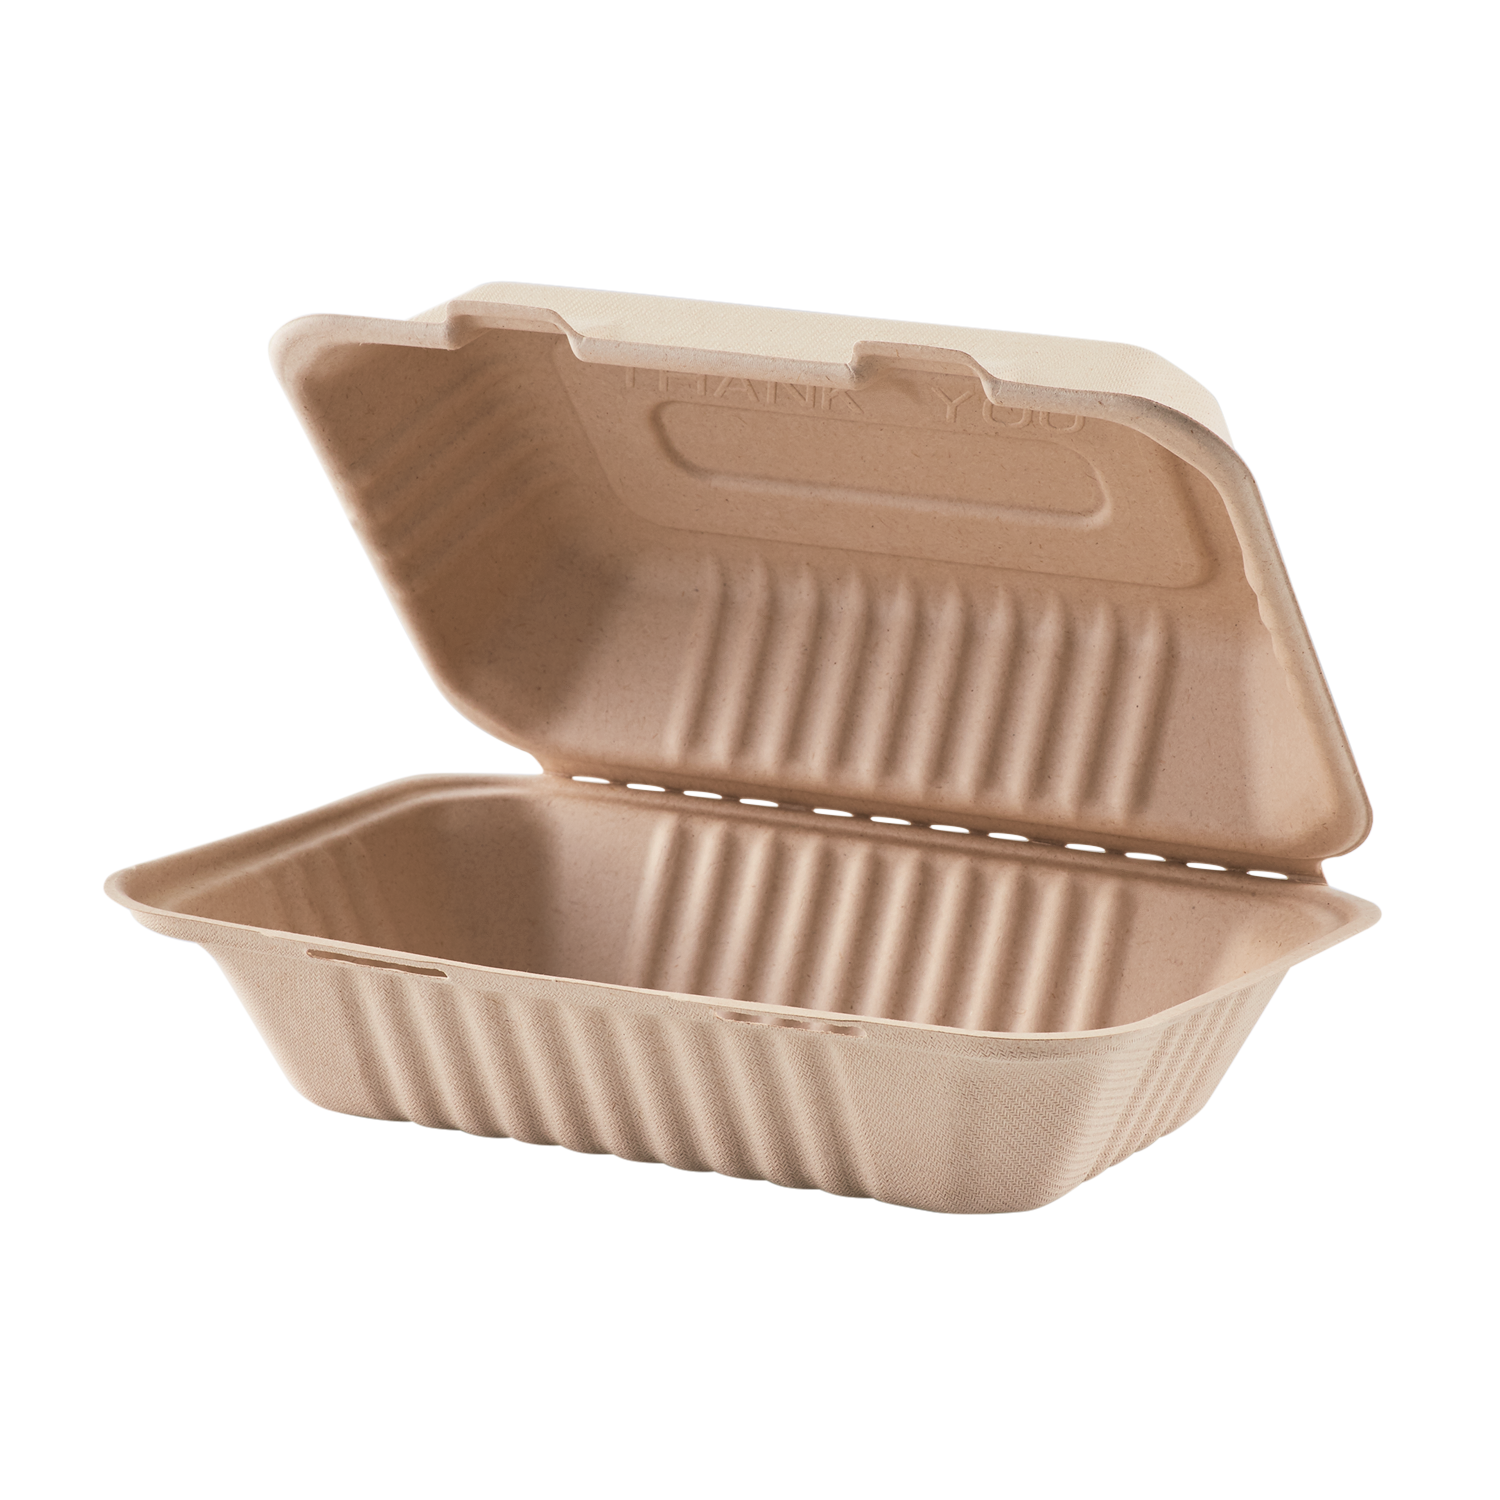 Buy Take Out Boxes Clamshell Hinged Biodegradable To Go Food